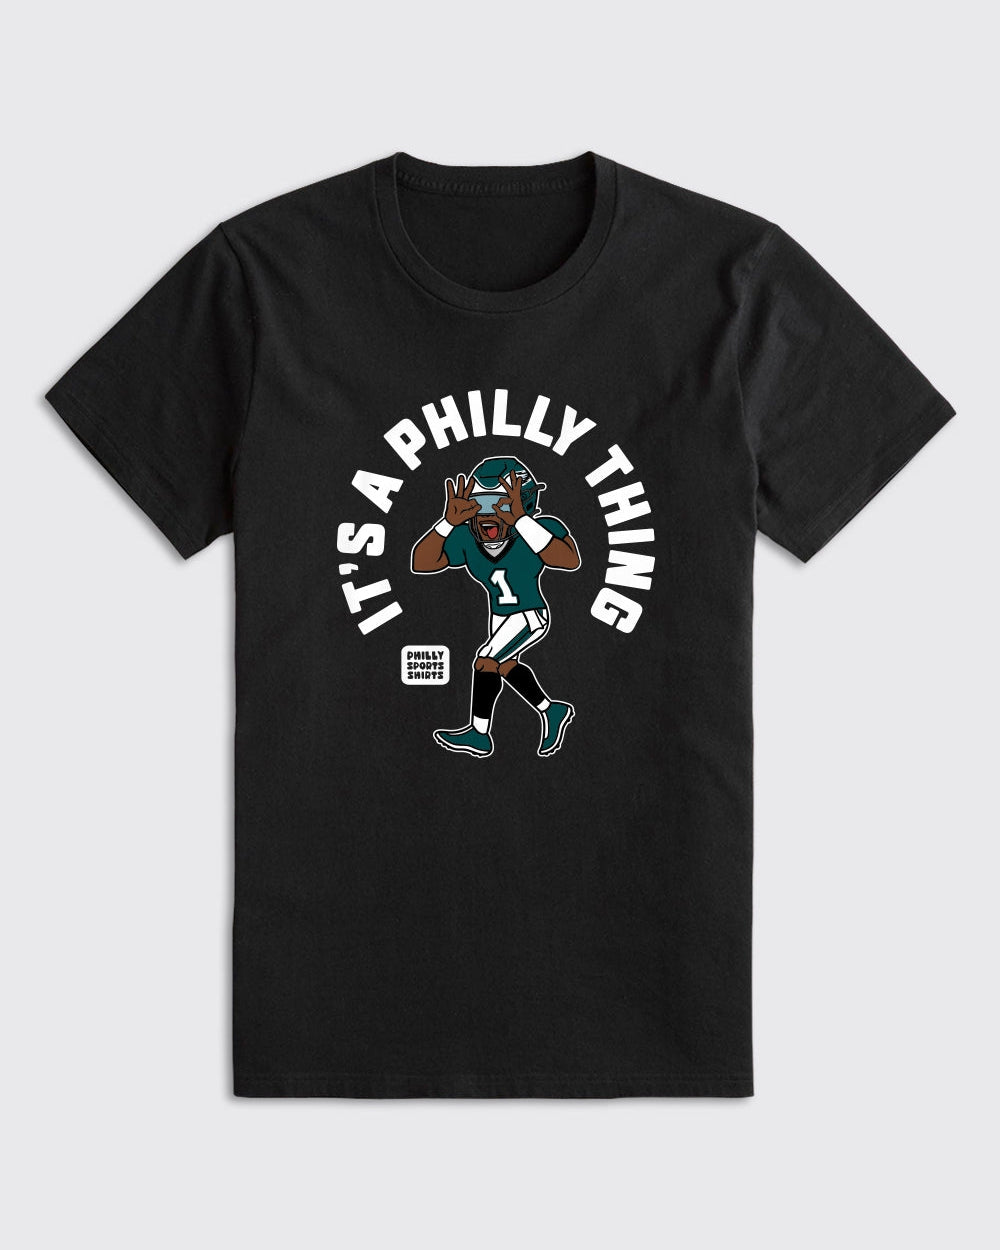 It's Philly Thing Shirt, Philadelphia Eagles Shirt, Super Bowl Shirt - Ink  In Action